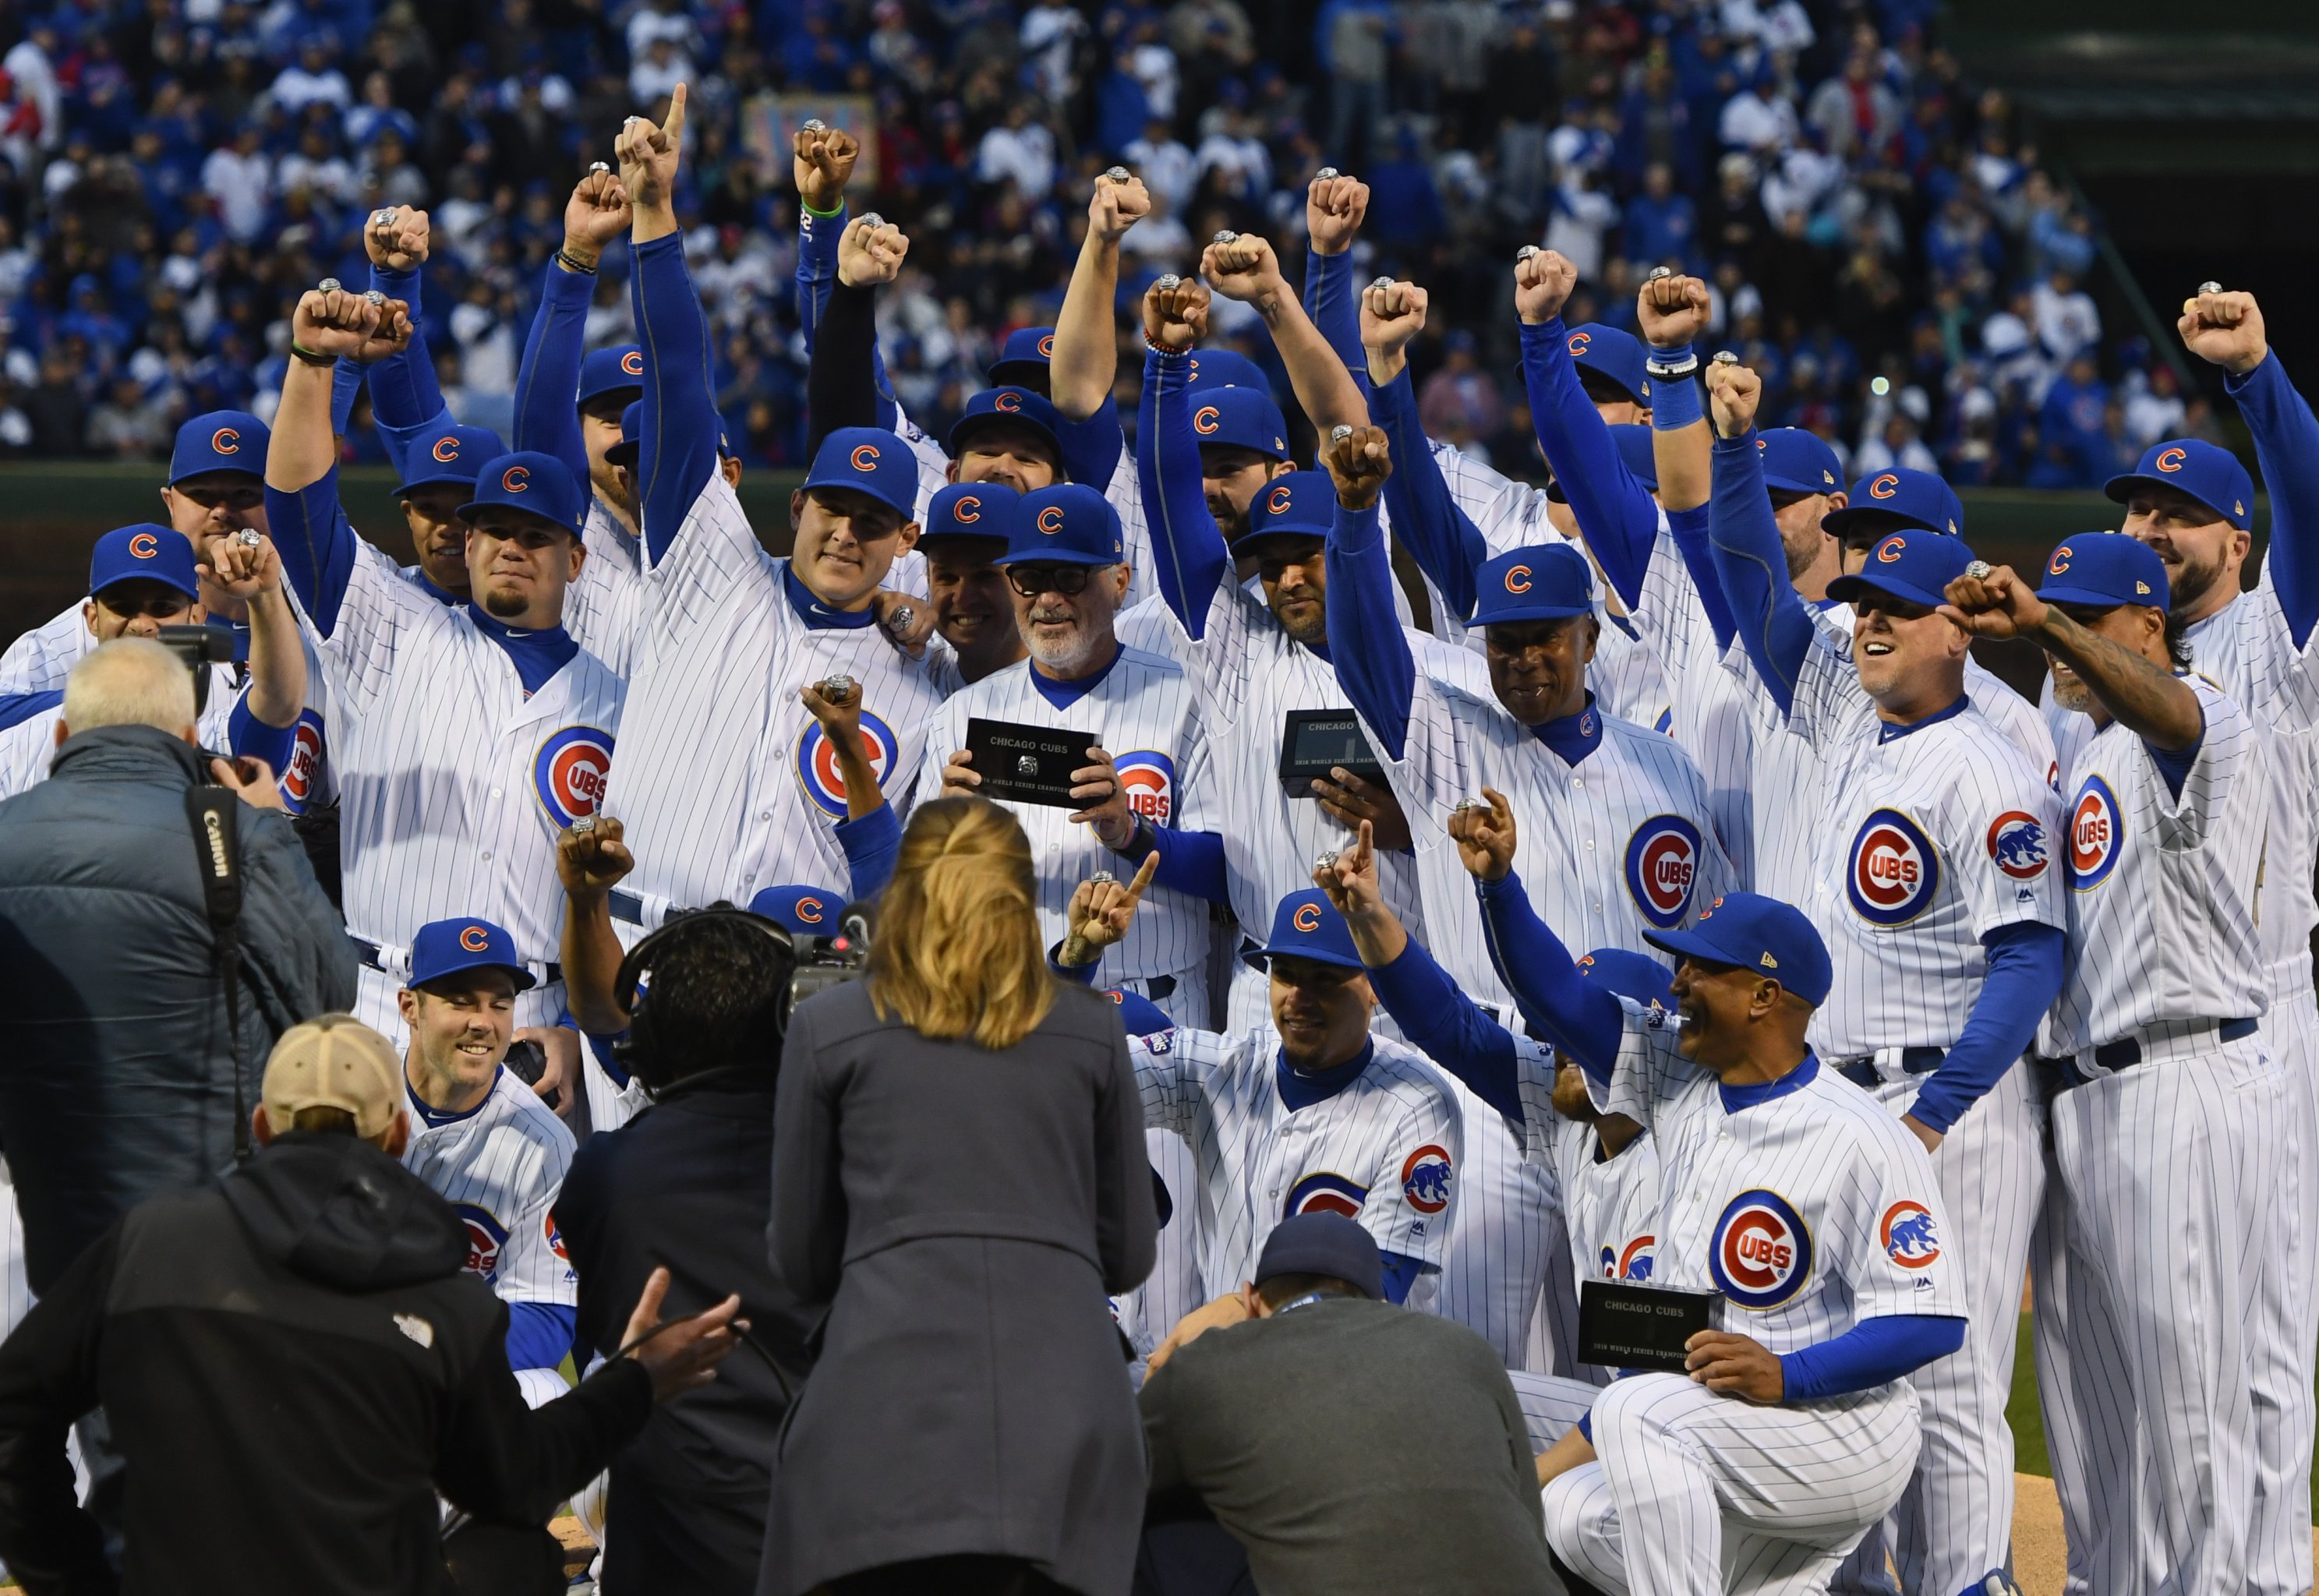 The Sweetest Escape: The Chicago Cubs Win the World Series